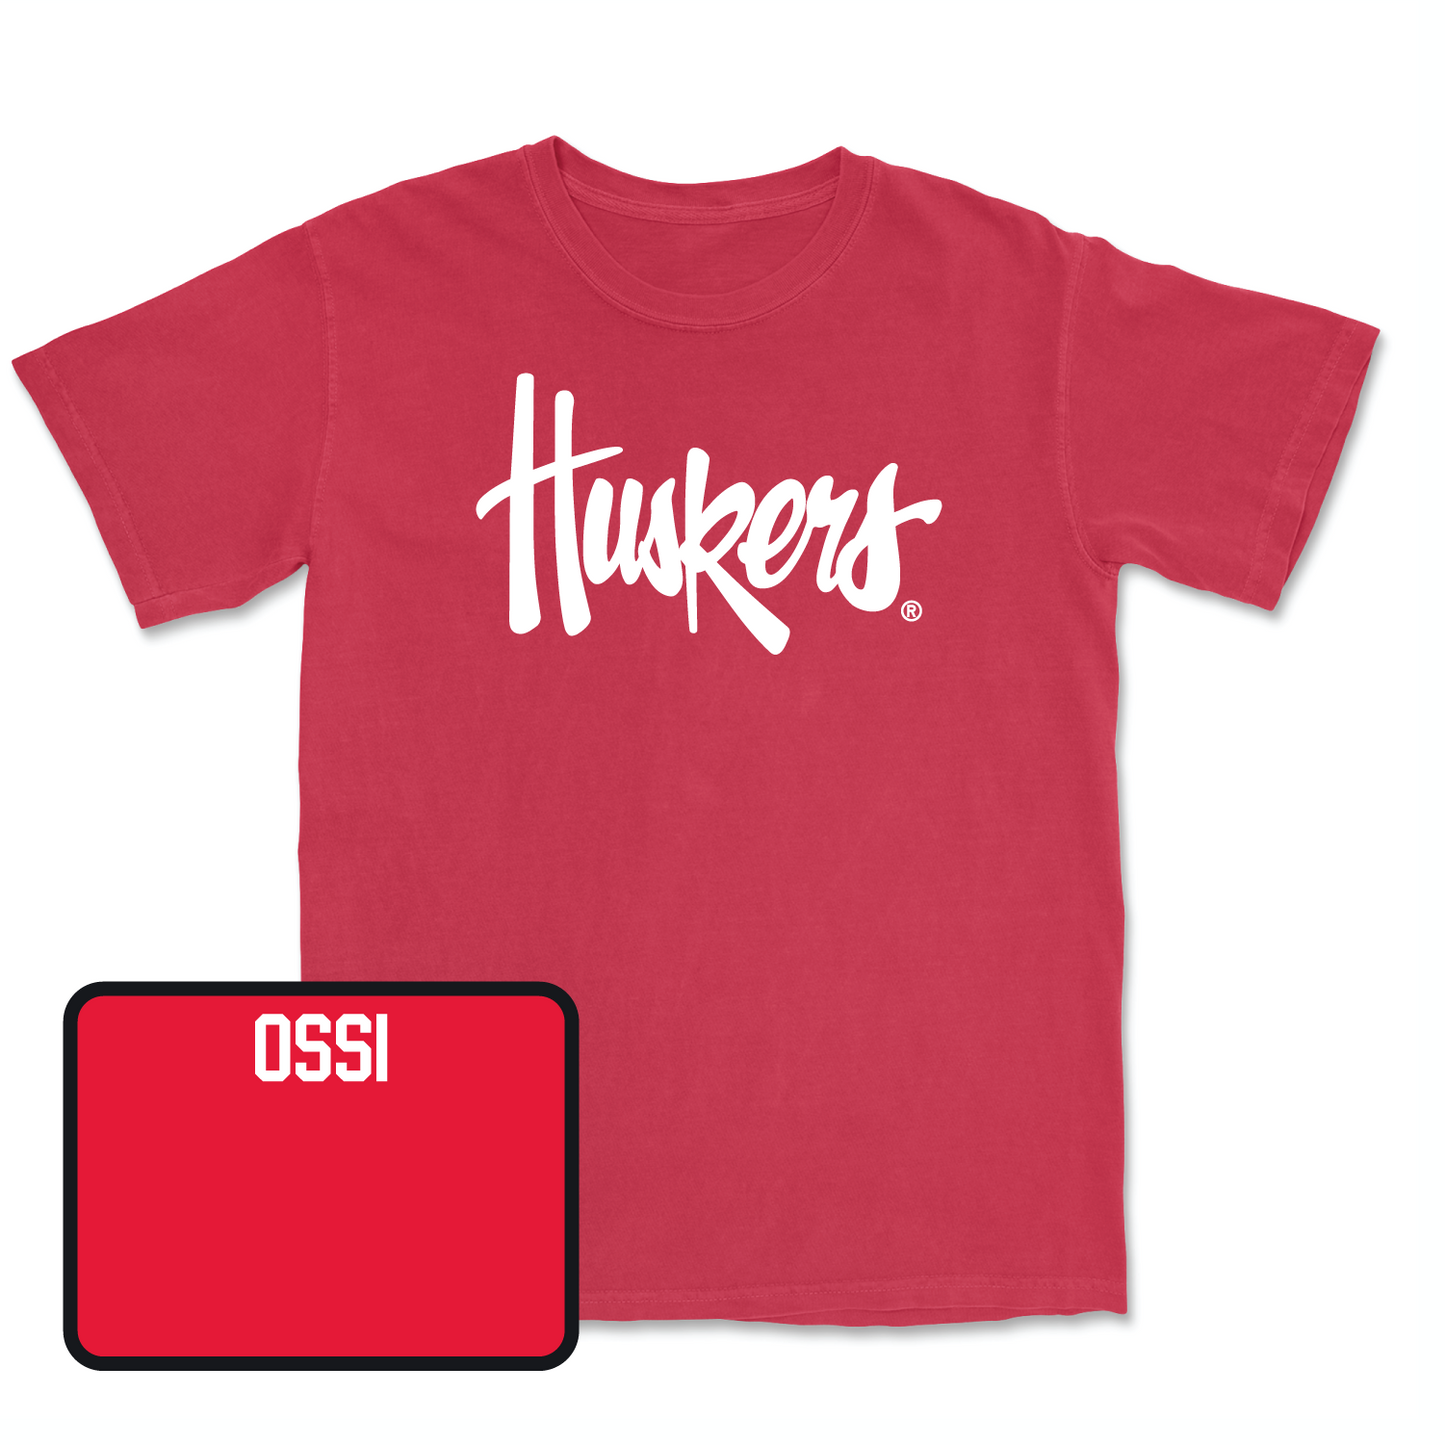 Red Women's Rifle Huskers Tee 3X-Large / Cecelia Ossi